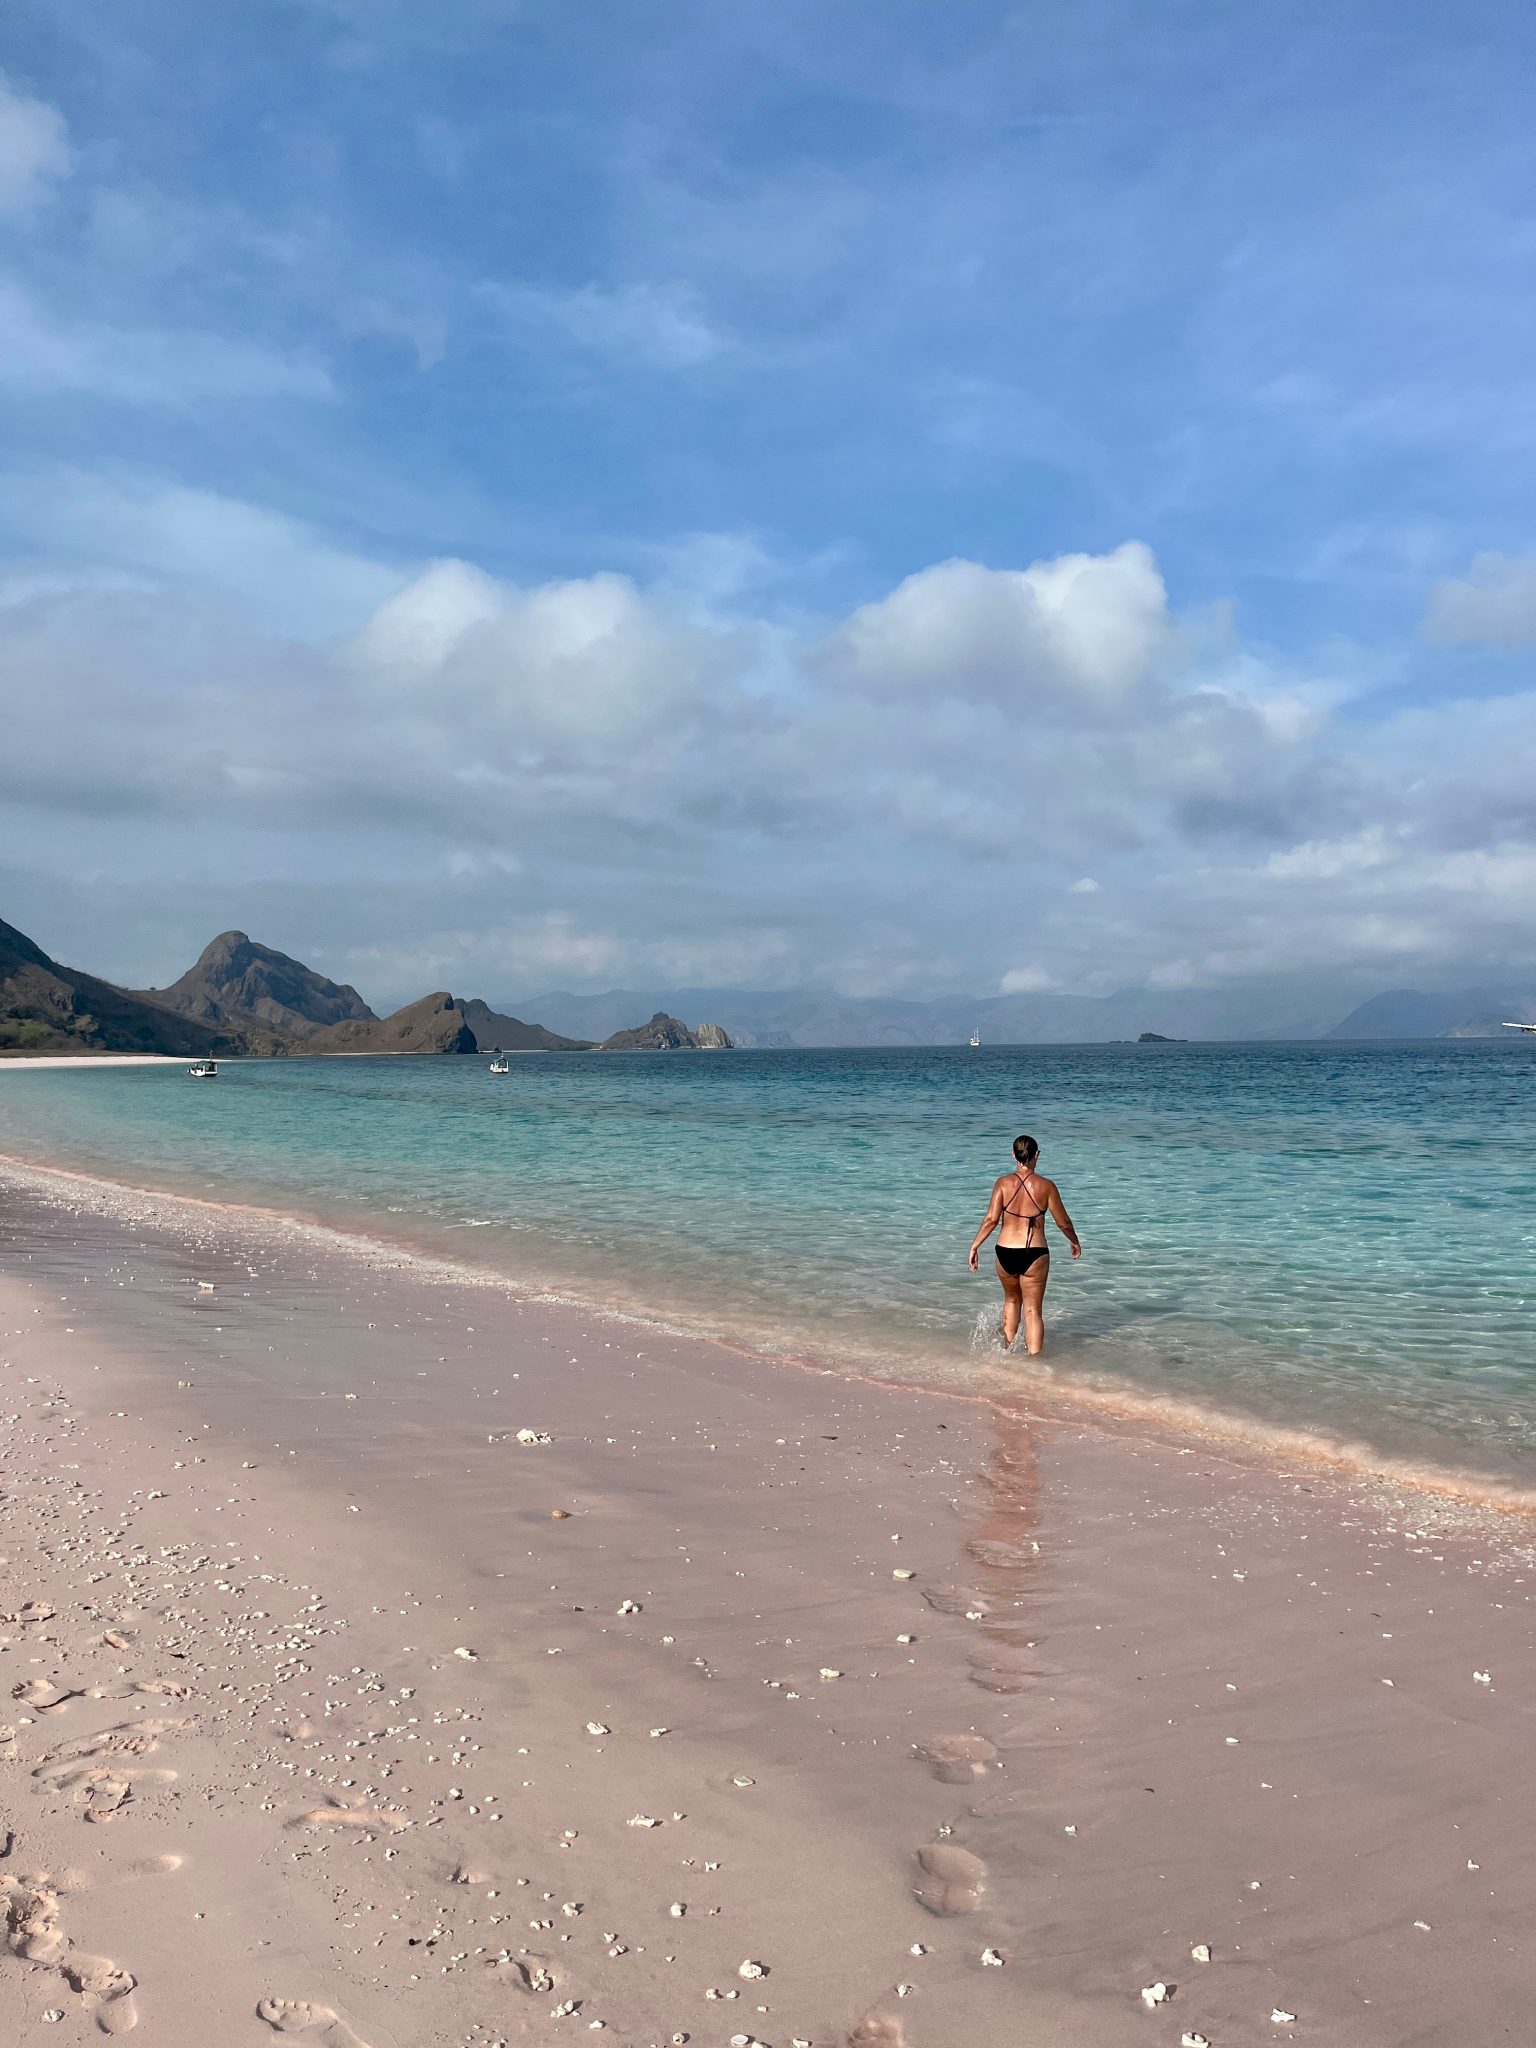 Viisit the pink beach in the komodo national park